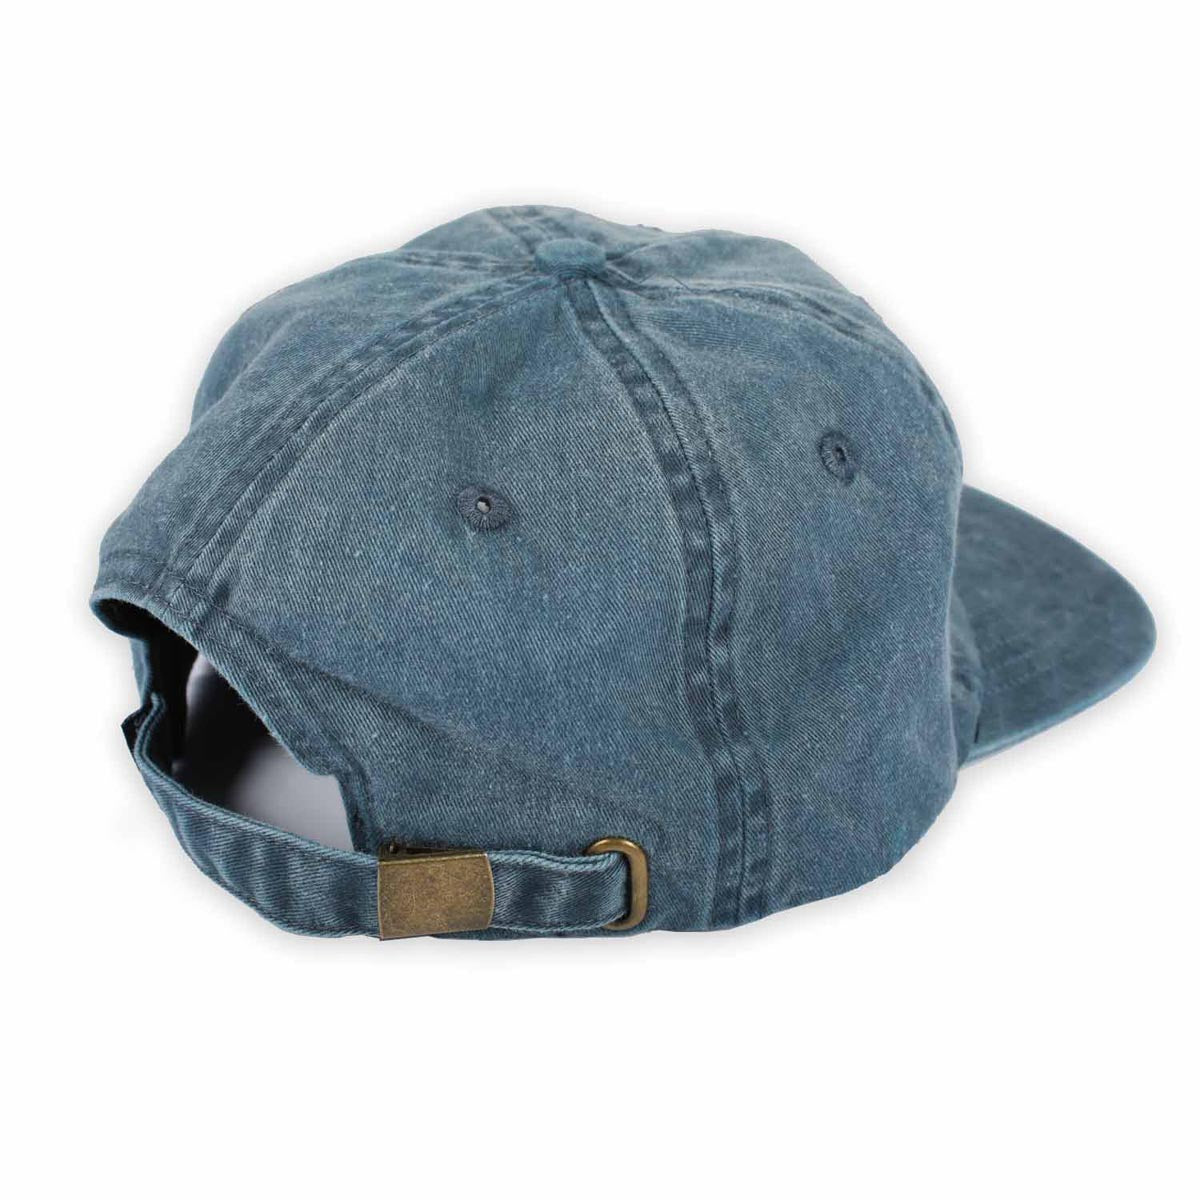 Theories Oasis Hat - Washed Blue image 2